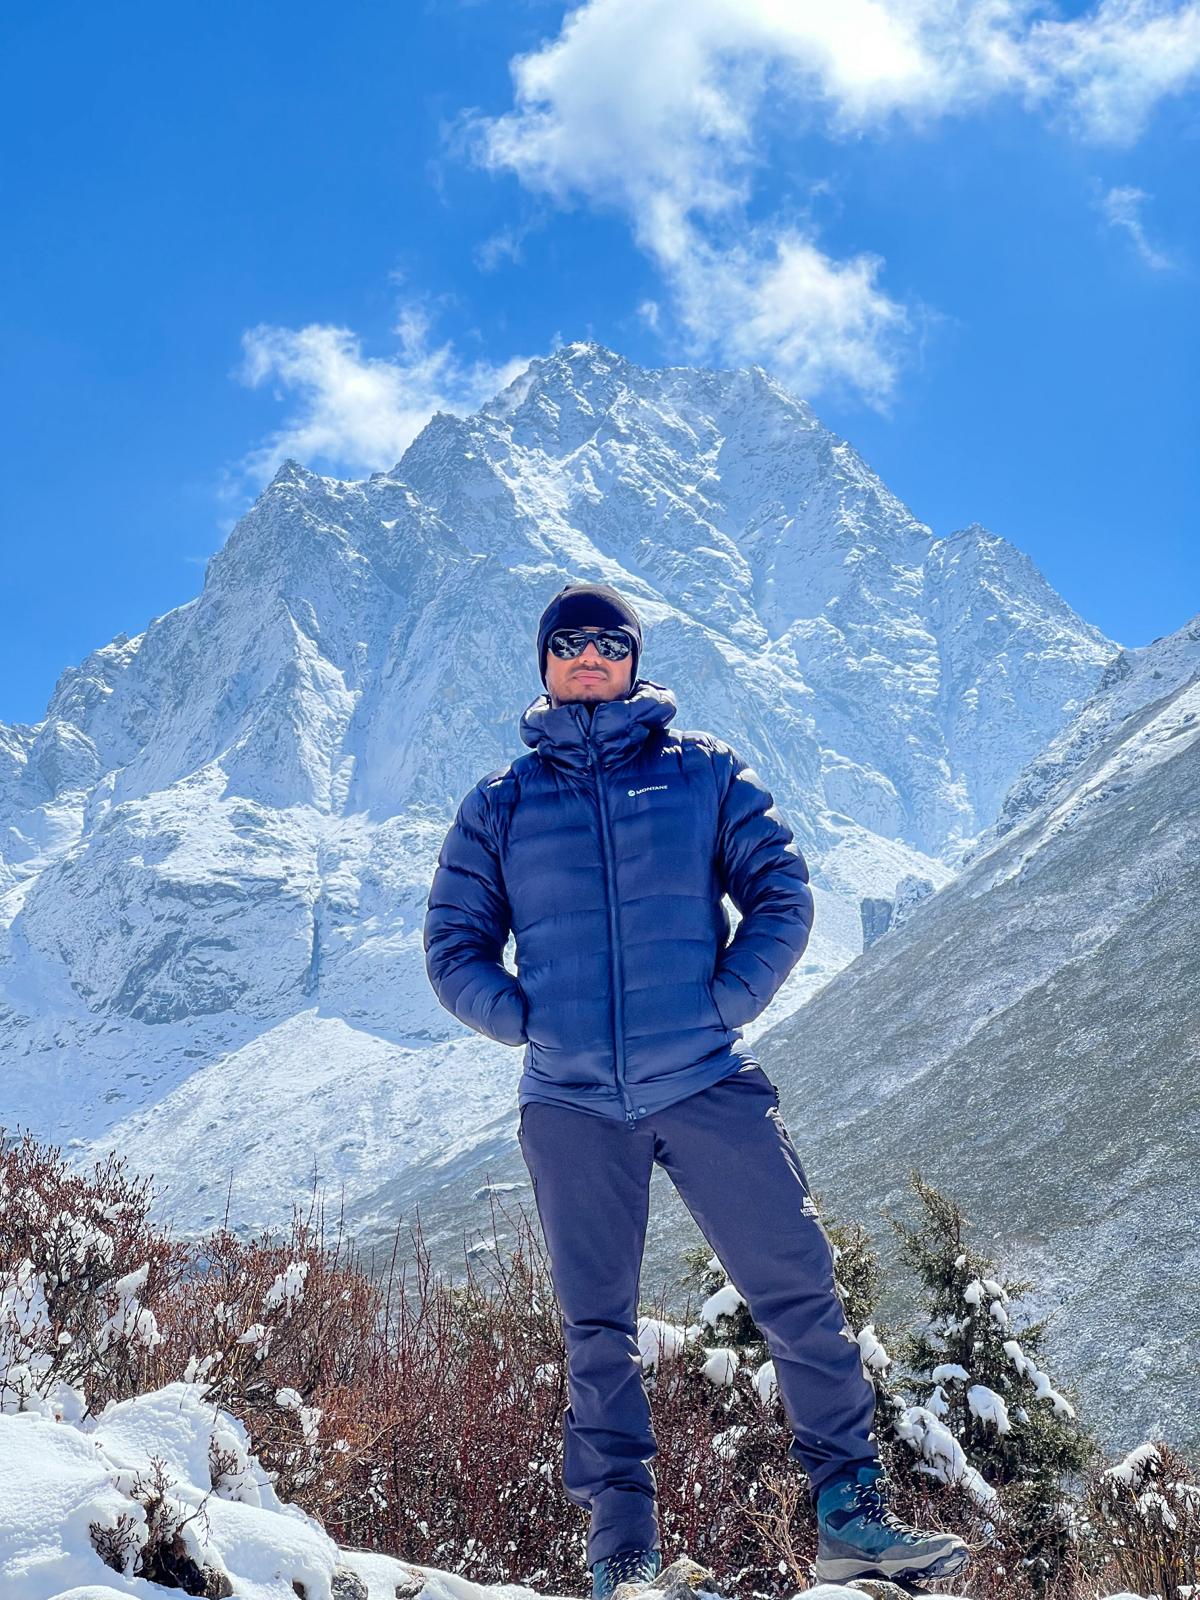 british mountaineer ‘confident’ ahead of scaling world’s 14 highest mountains